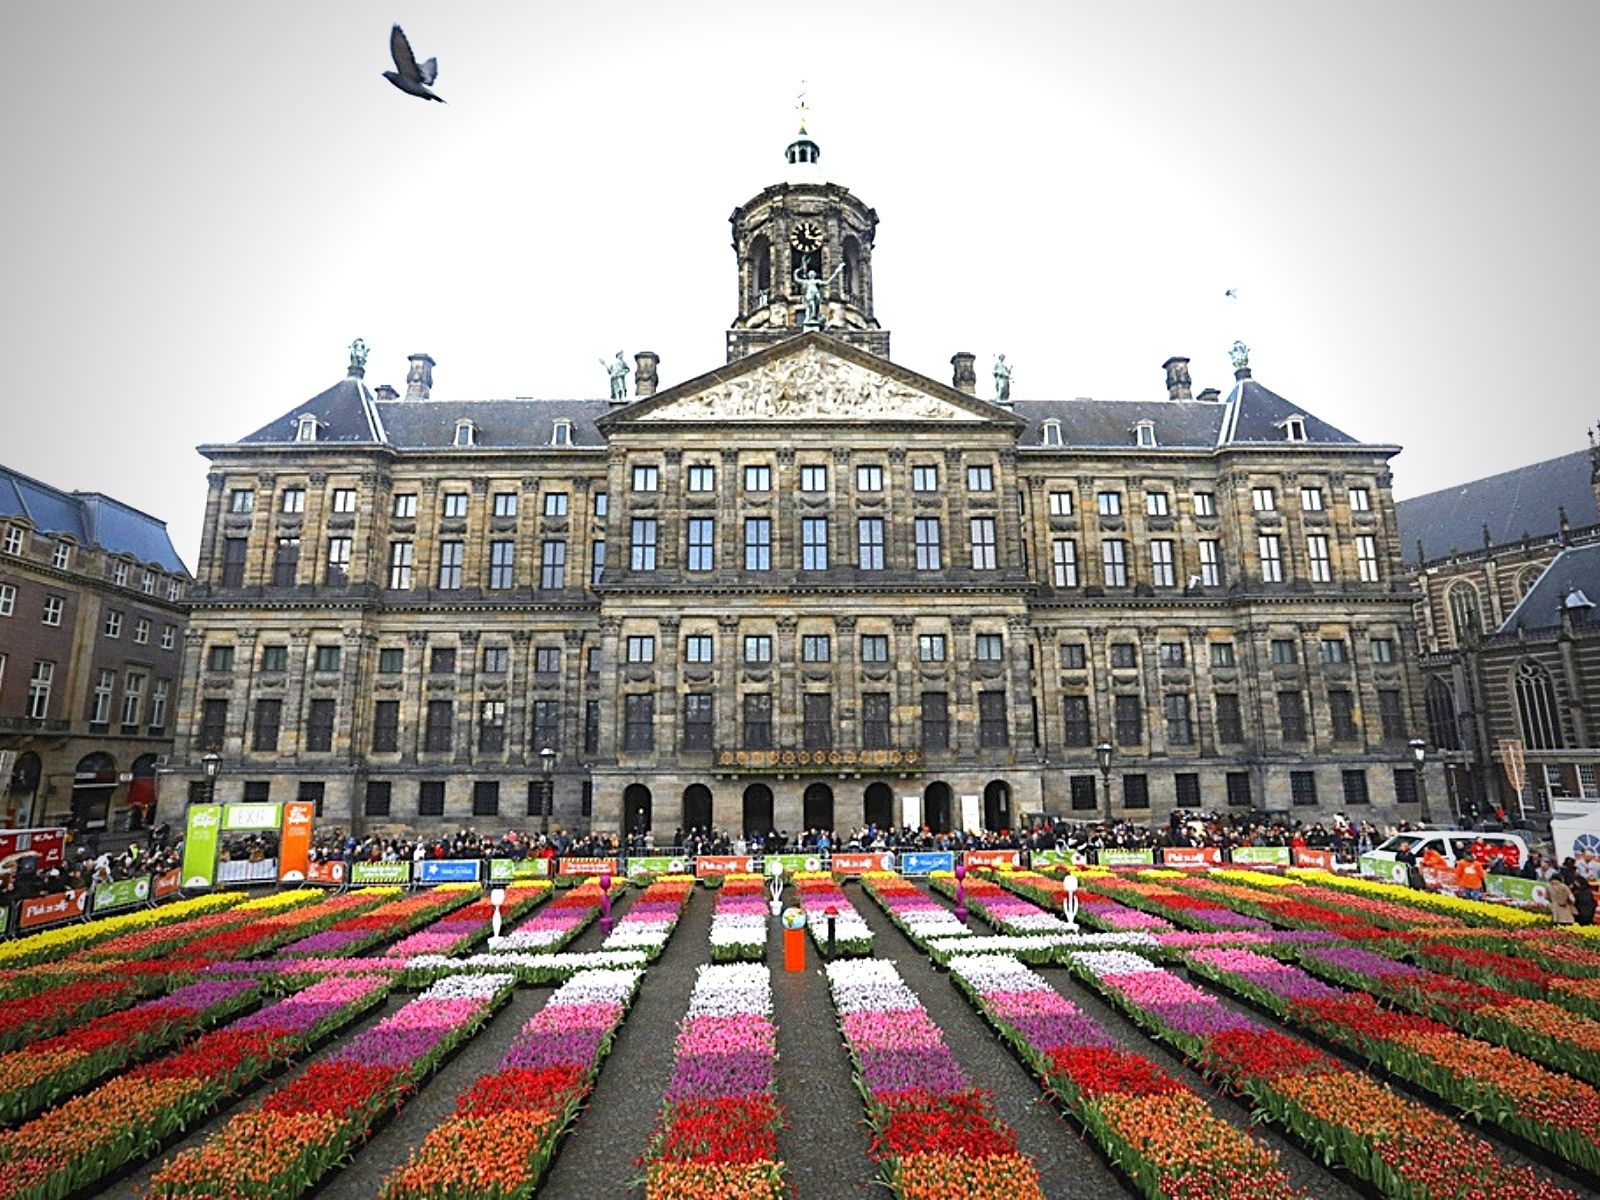 its-time-for-tulips-dutch-tulip-days-take-off-this-saturday-featured